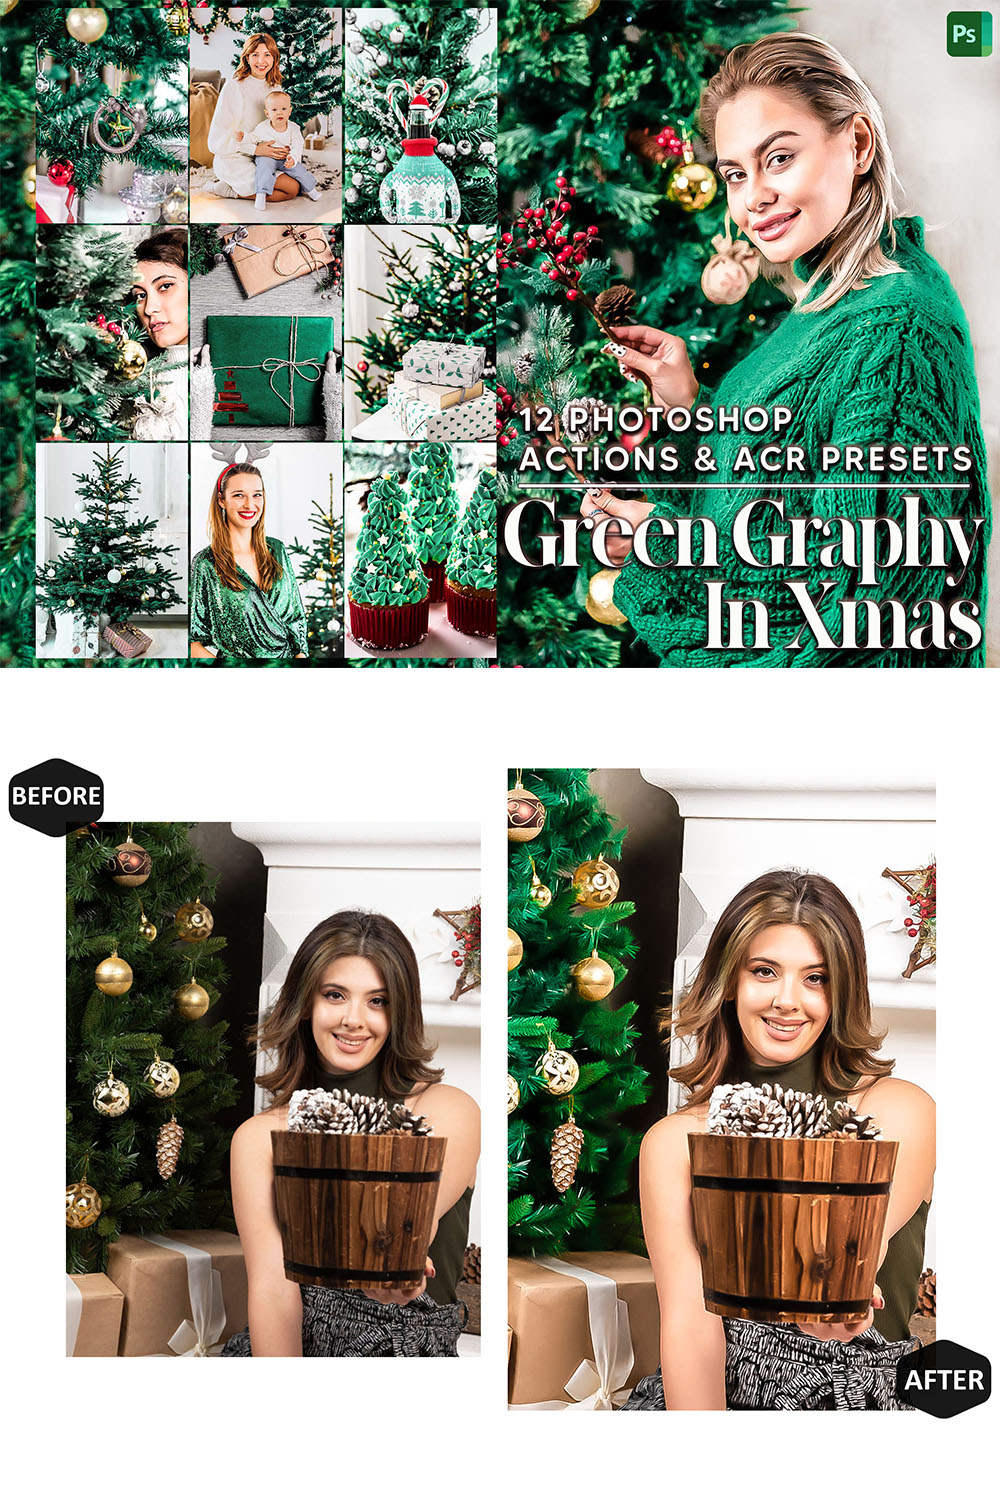 12 Photoshop Actions, Green Graphy In Xmas Ps Action, Bright ACR Preset, Vibrant Ps Filter, Atn Portrait And Lifestyle Theme For Instagram, Blogger pinterest preview image.